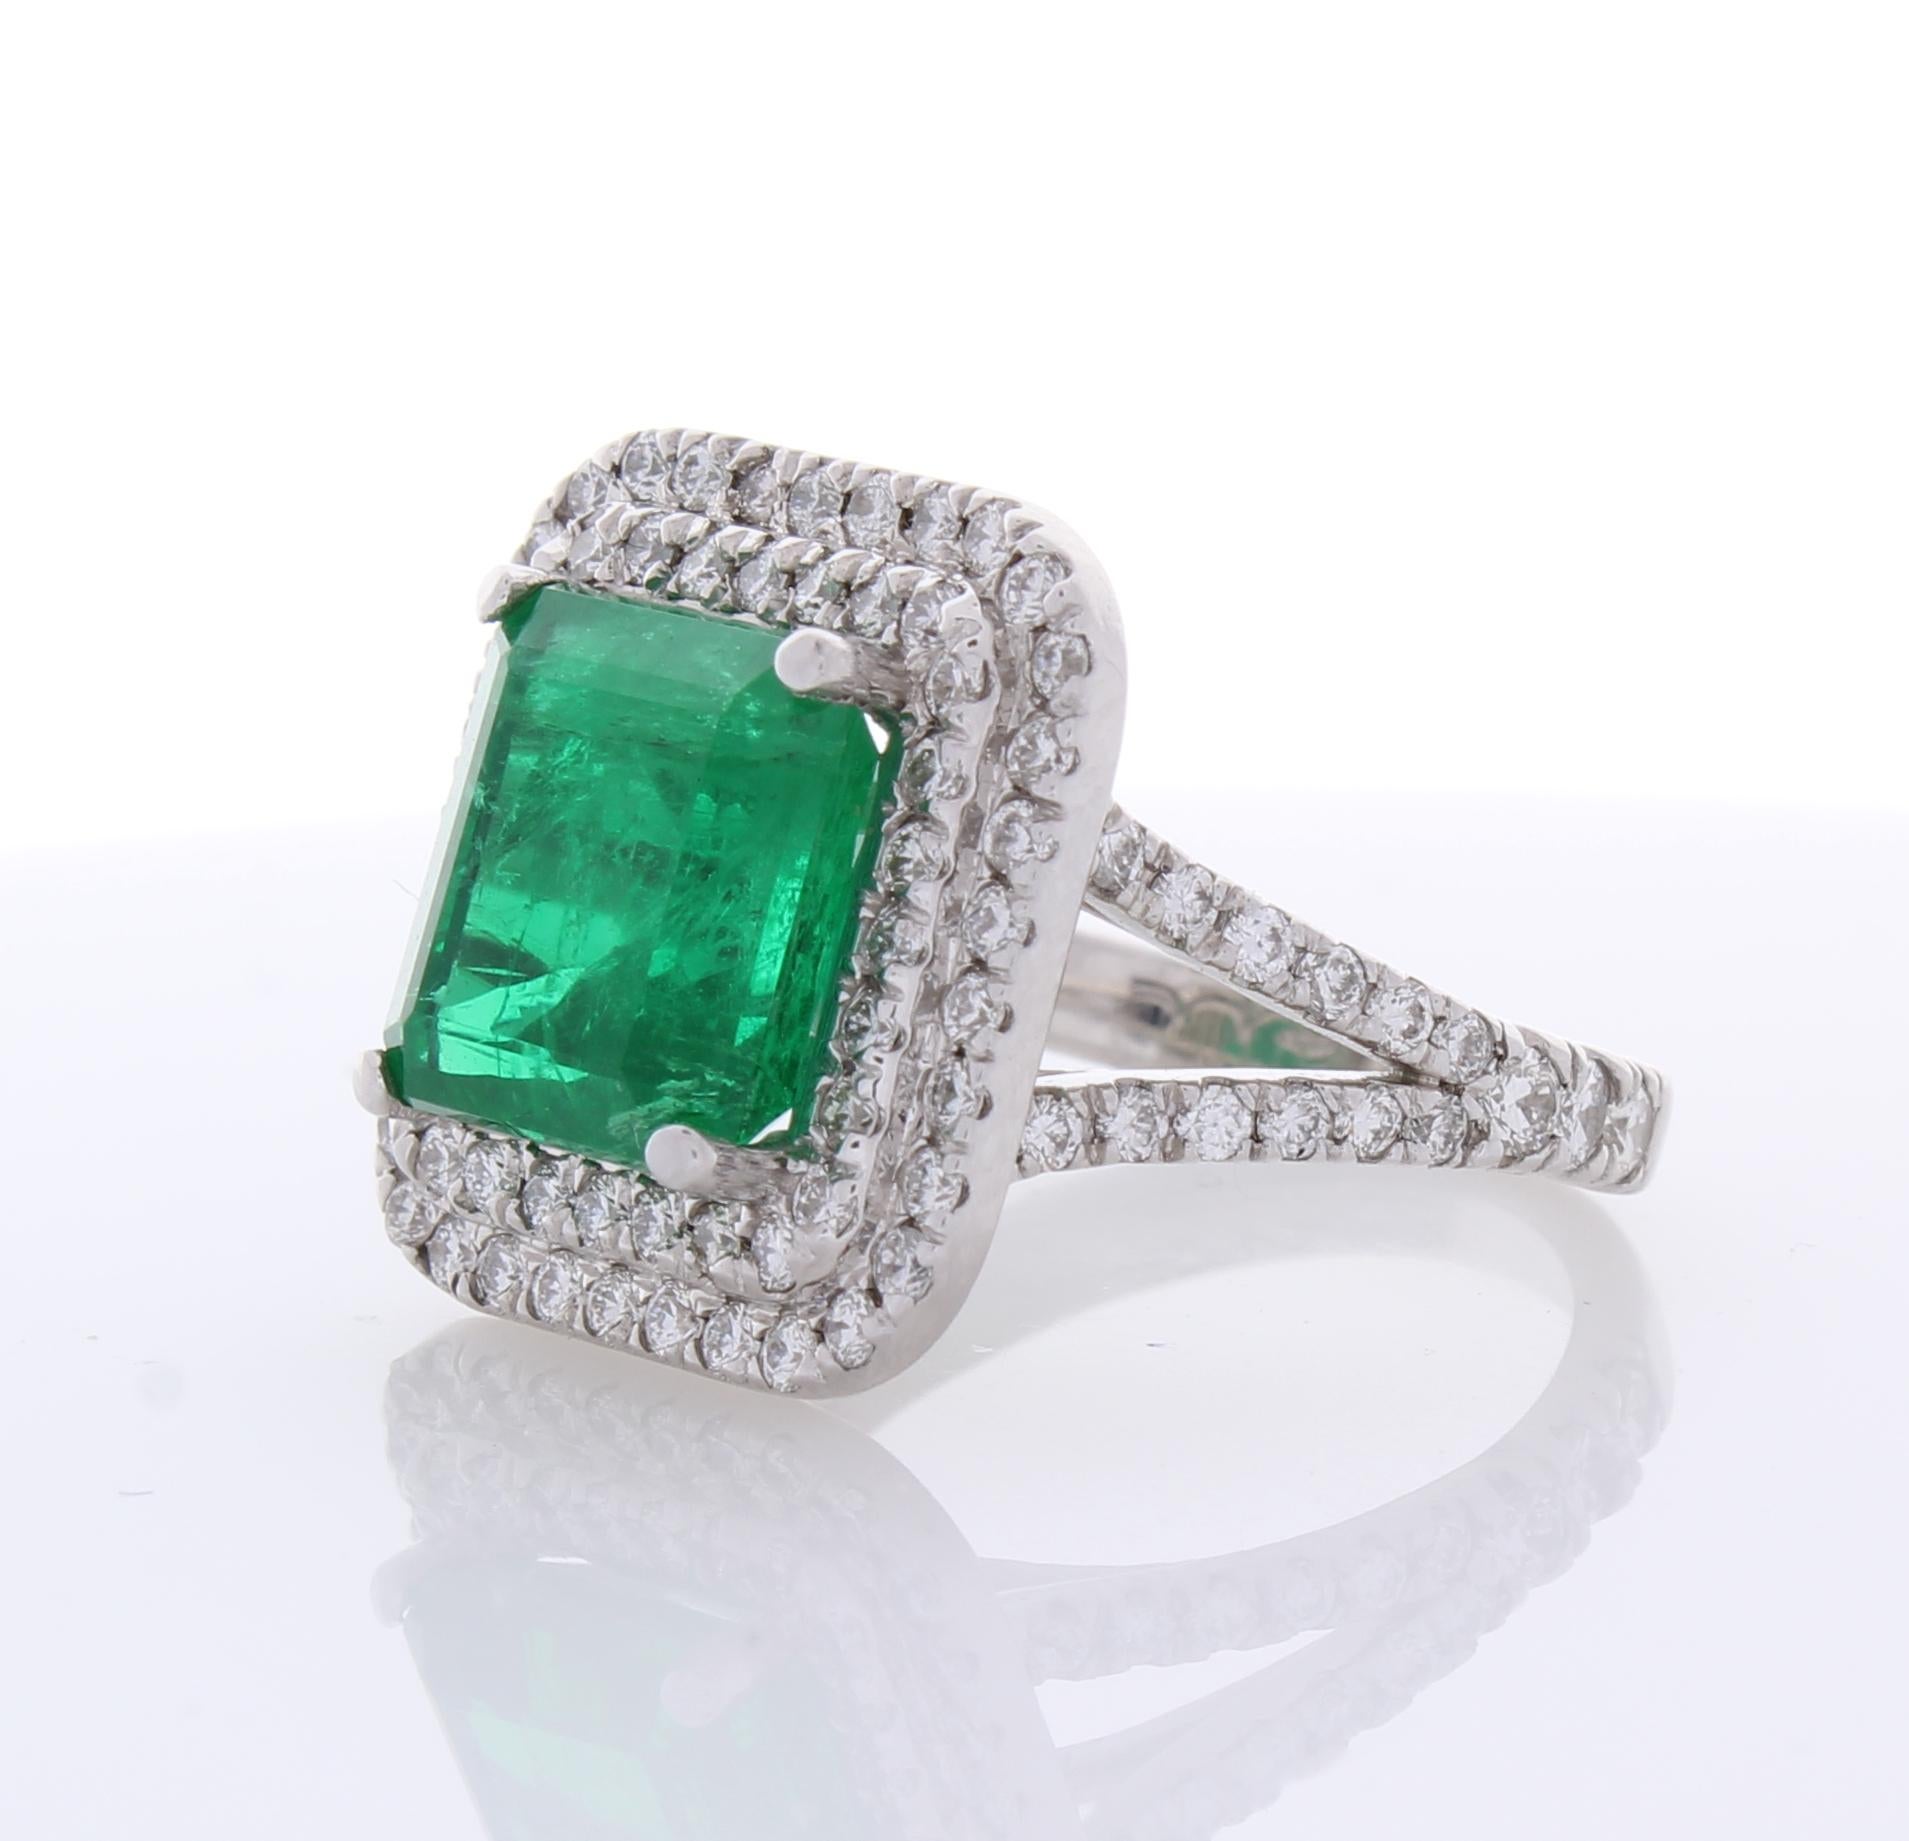 Contemporary 5.30 Carat Emerald Cut Emerald and Diamond Cocktail Ring in 18 Karat White Gold